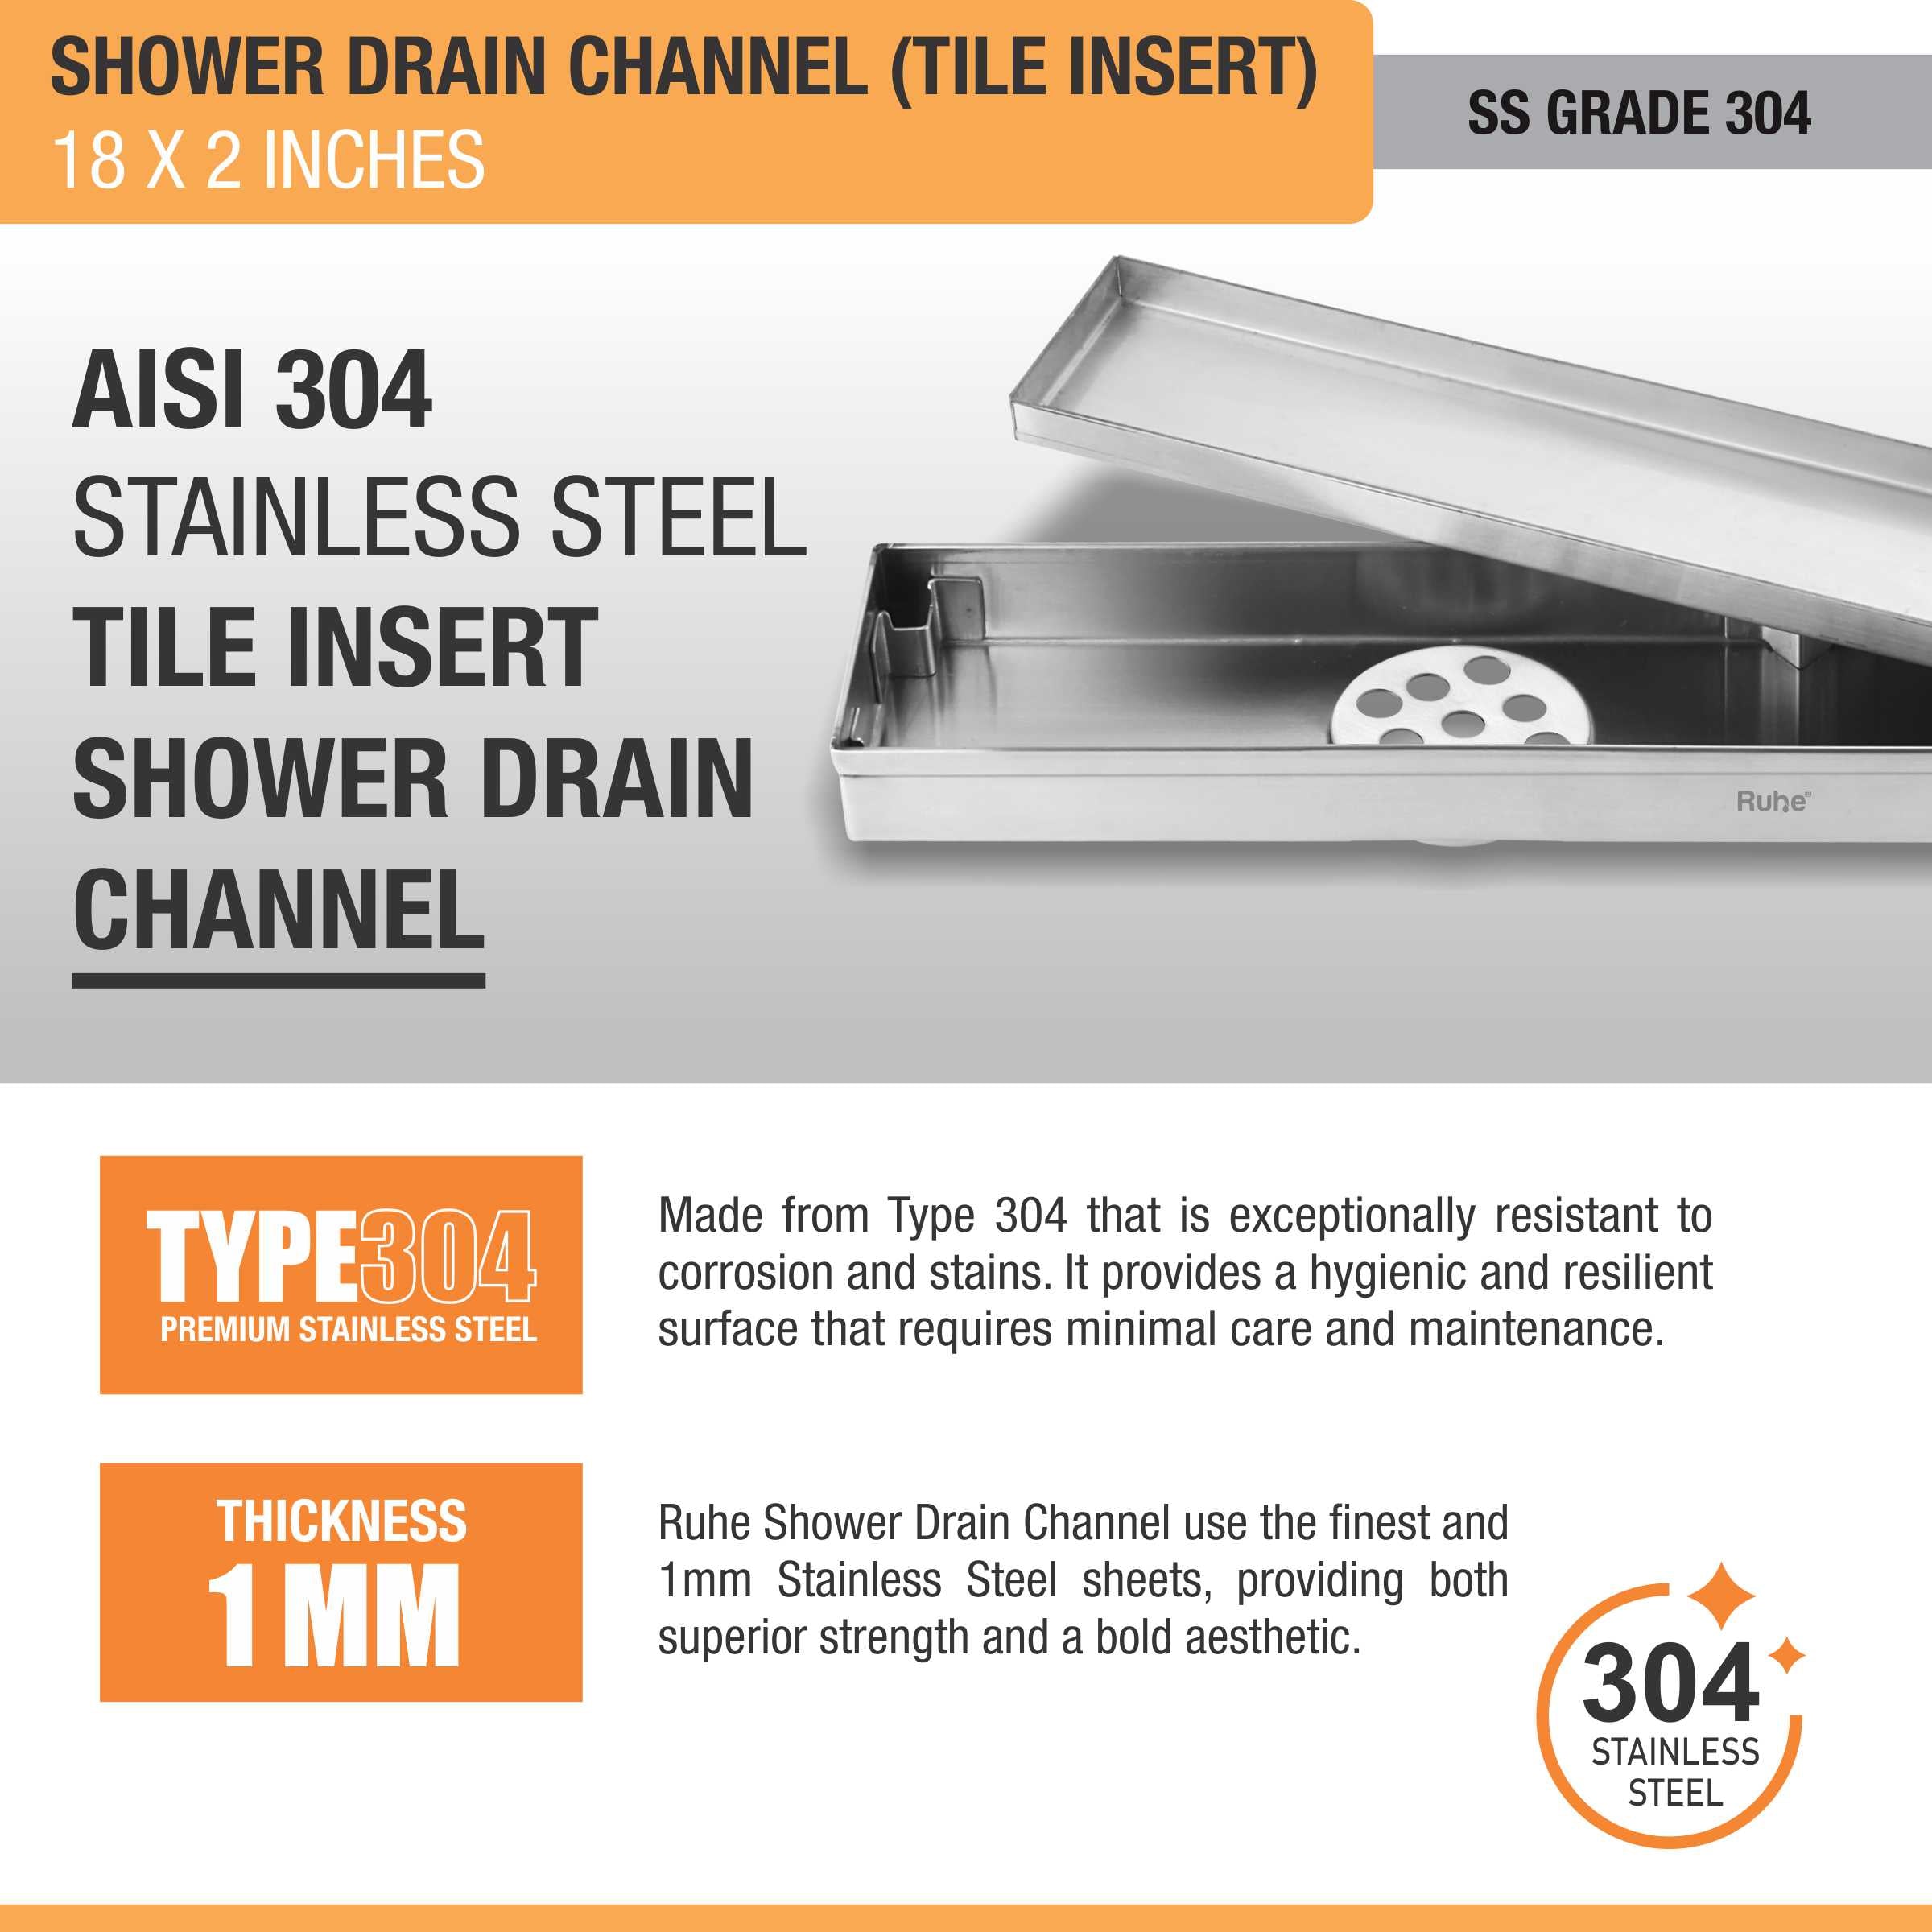 Tile Insert Shower Drain Channel (18 x 2 Inches) (304 Grade) stainless steel